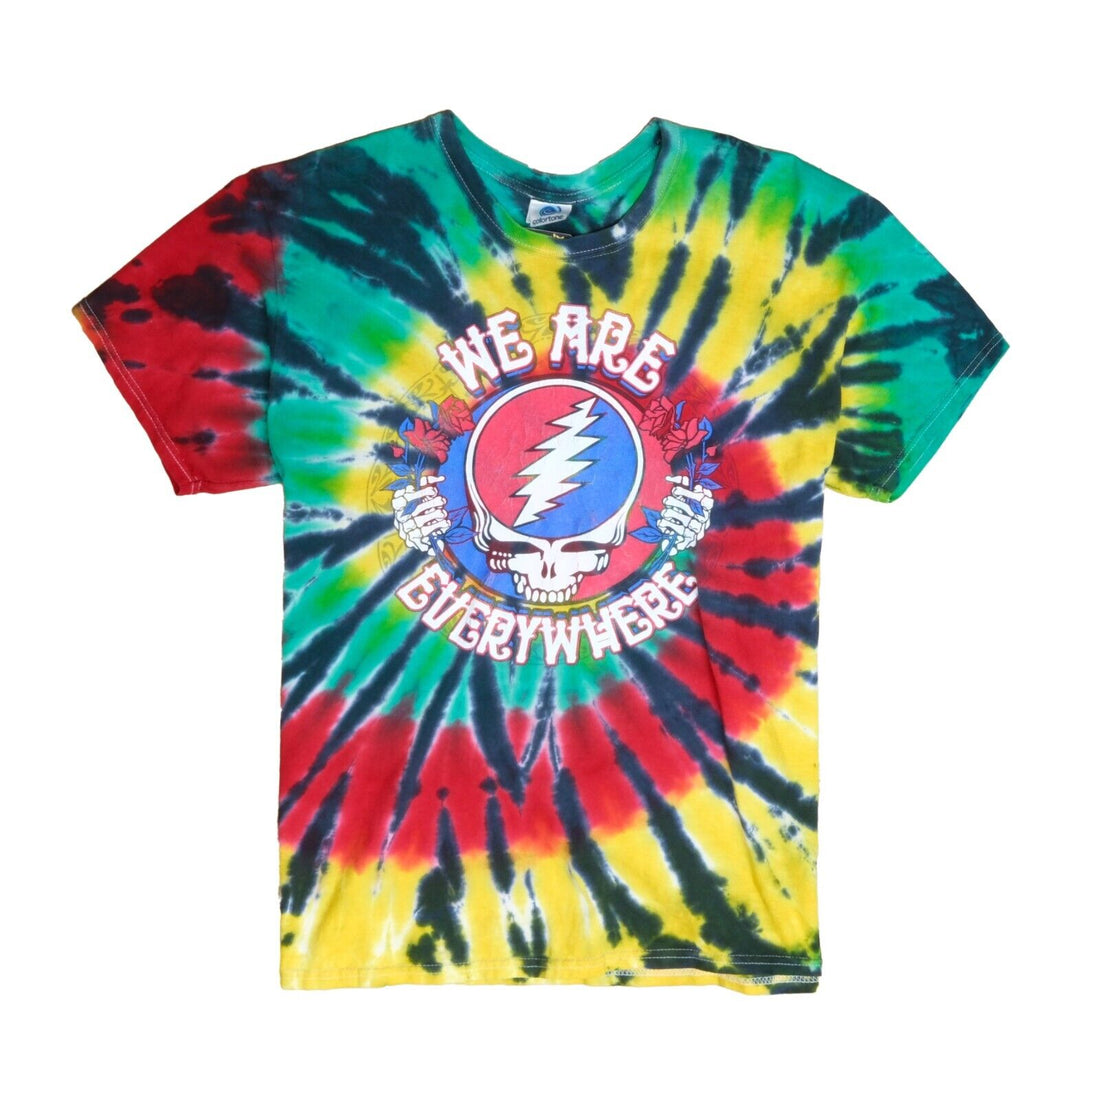 Grateful Dead We Are Everywhere Tie Dye T-Shirt Size Large Band Tee